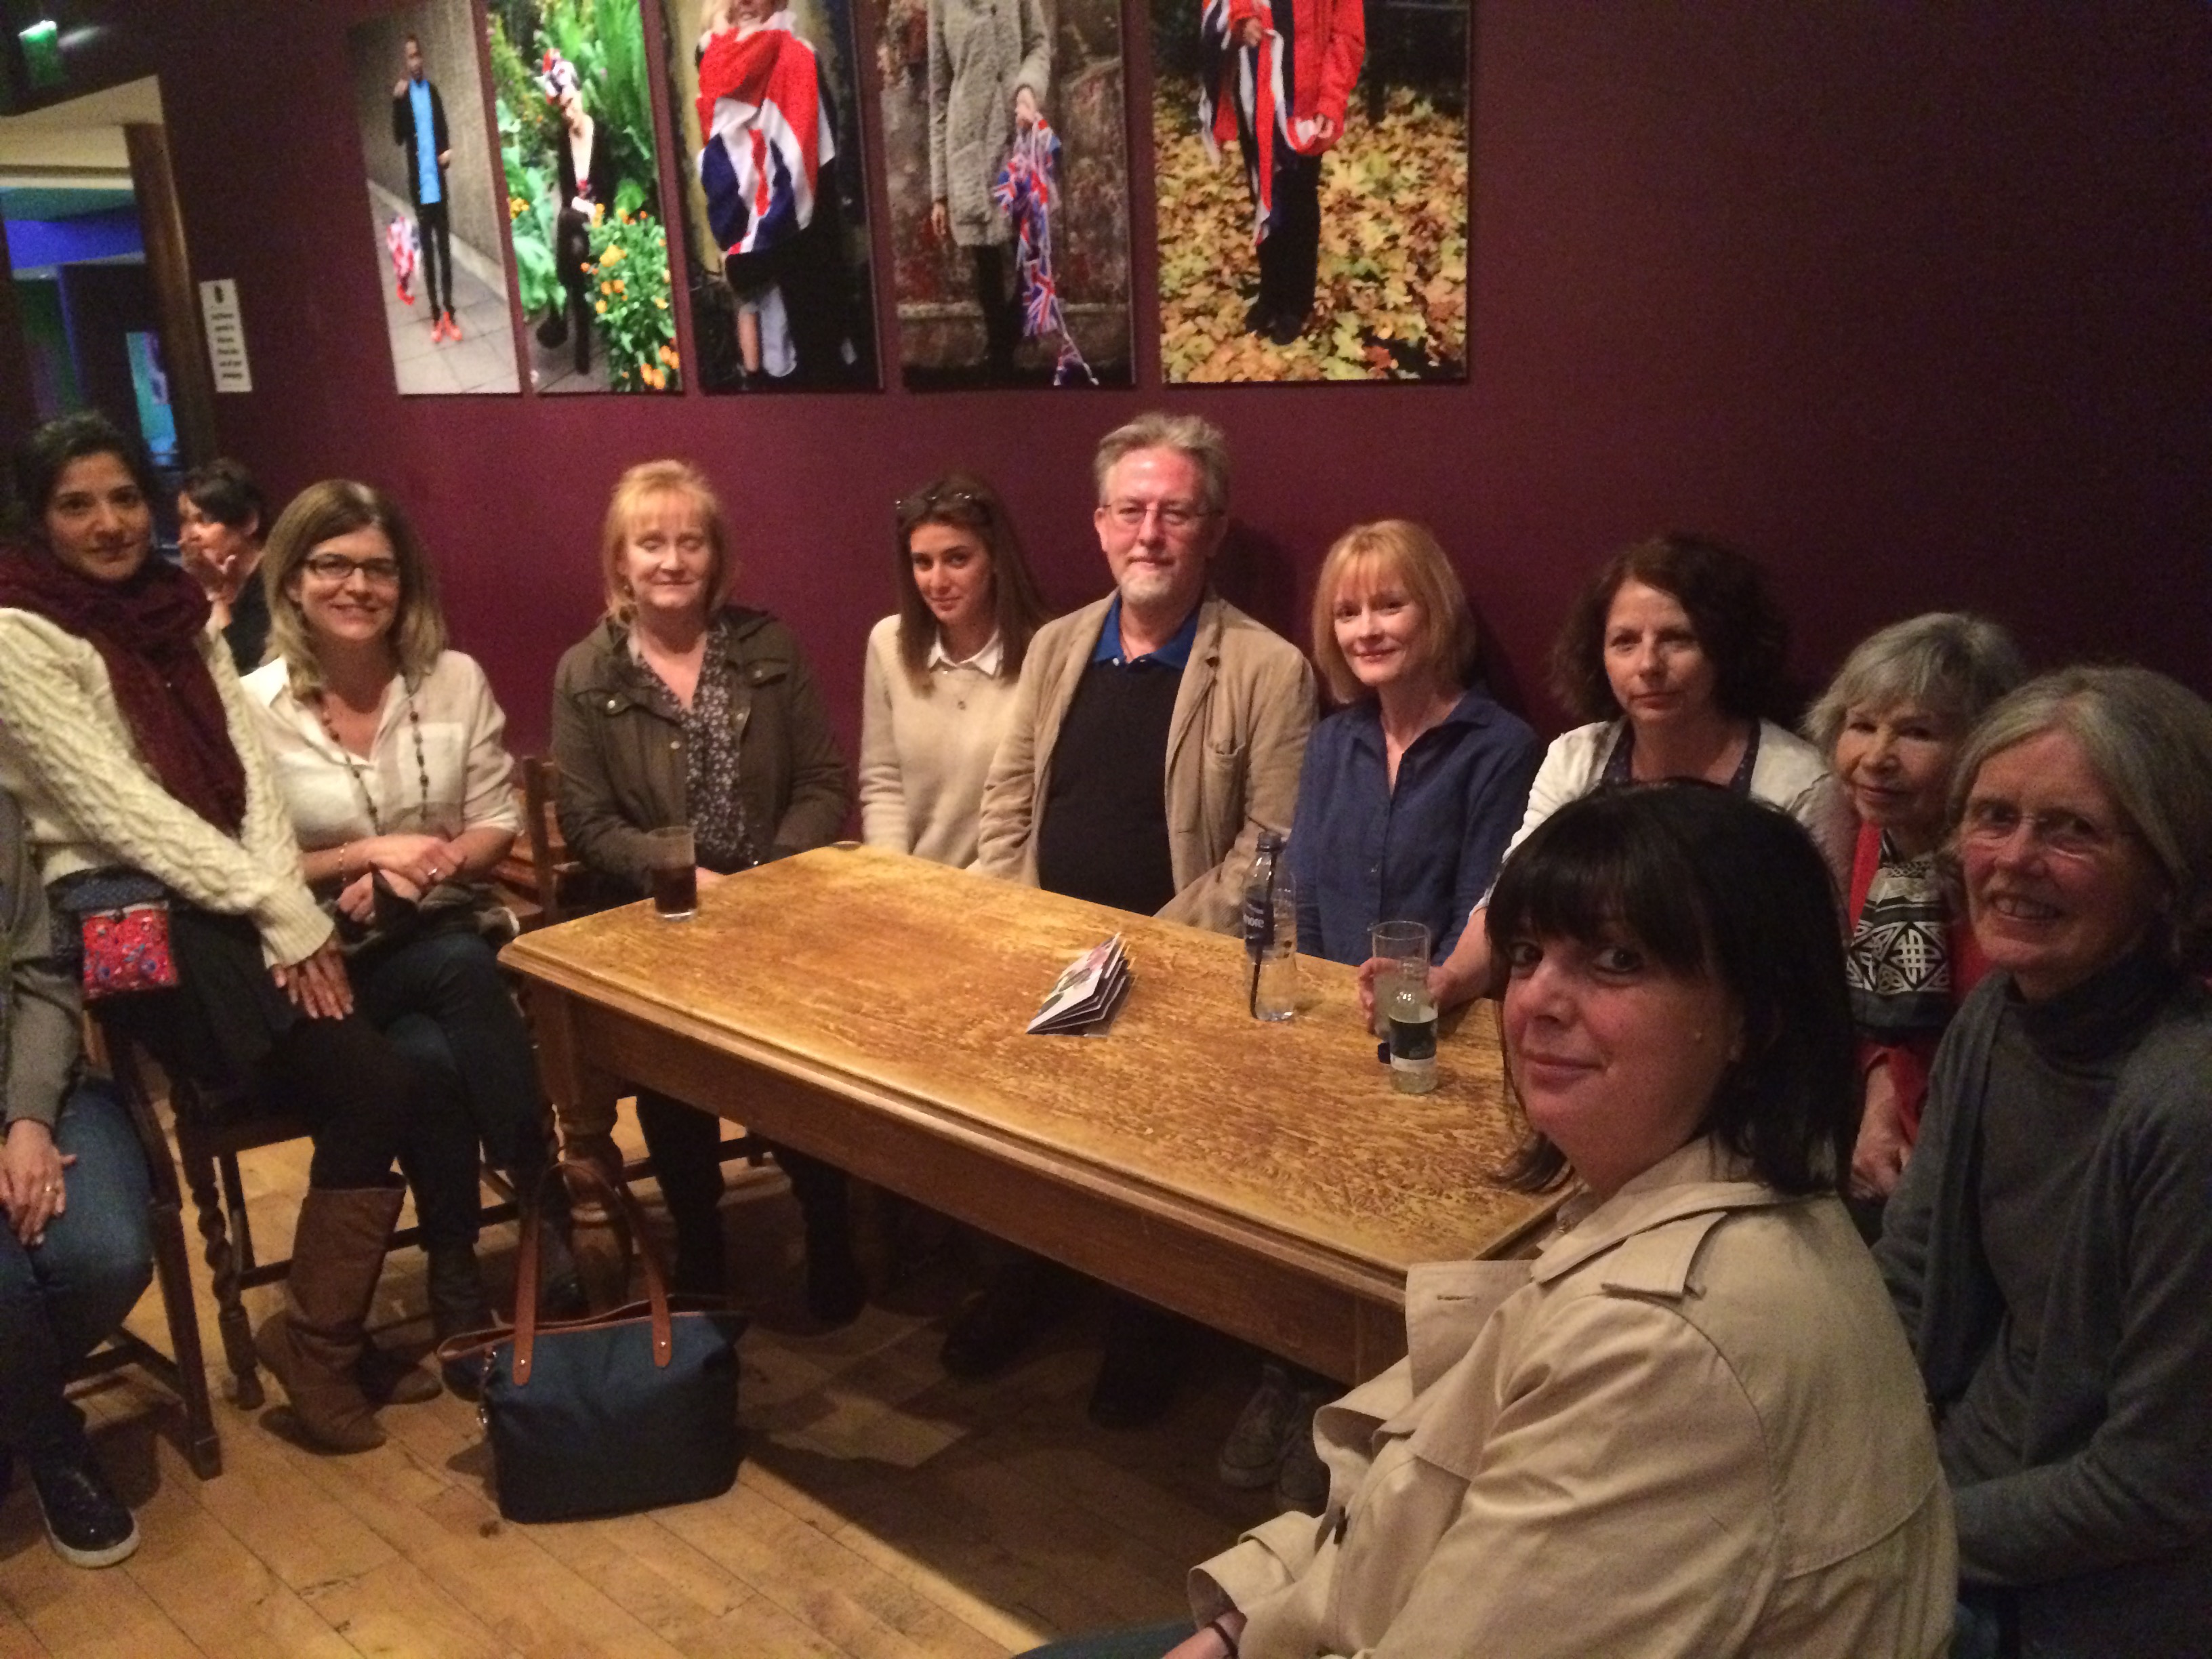 Our Barnet Volunteers and Coordinator Paul Higgins with actress Claire Skinner at the Tricycle Theatre, discussing 'The Father'